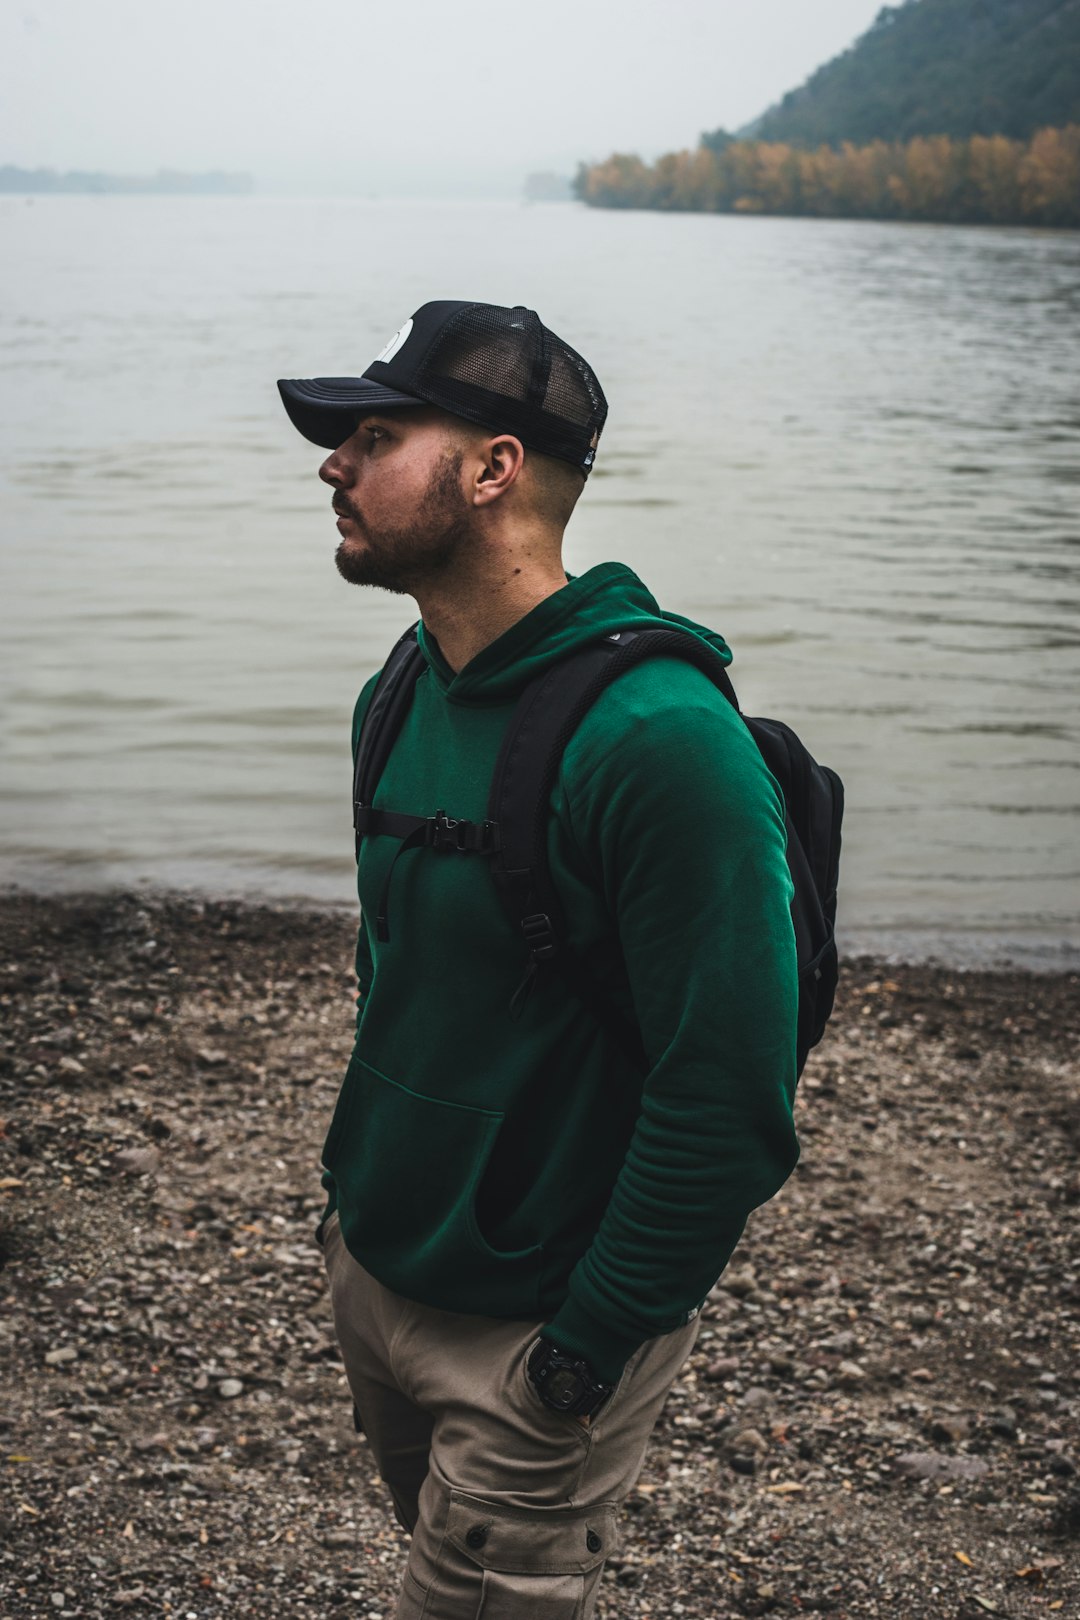 man in green jacket standing near body of water during daytime